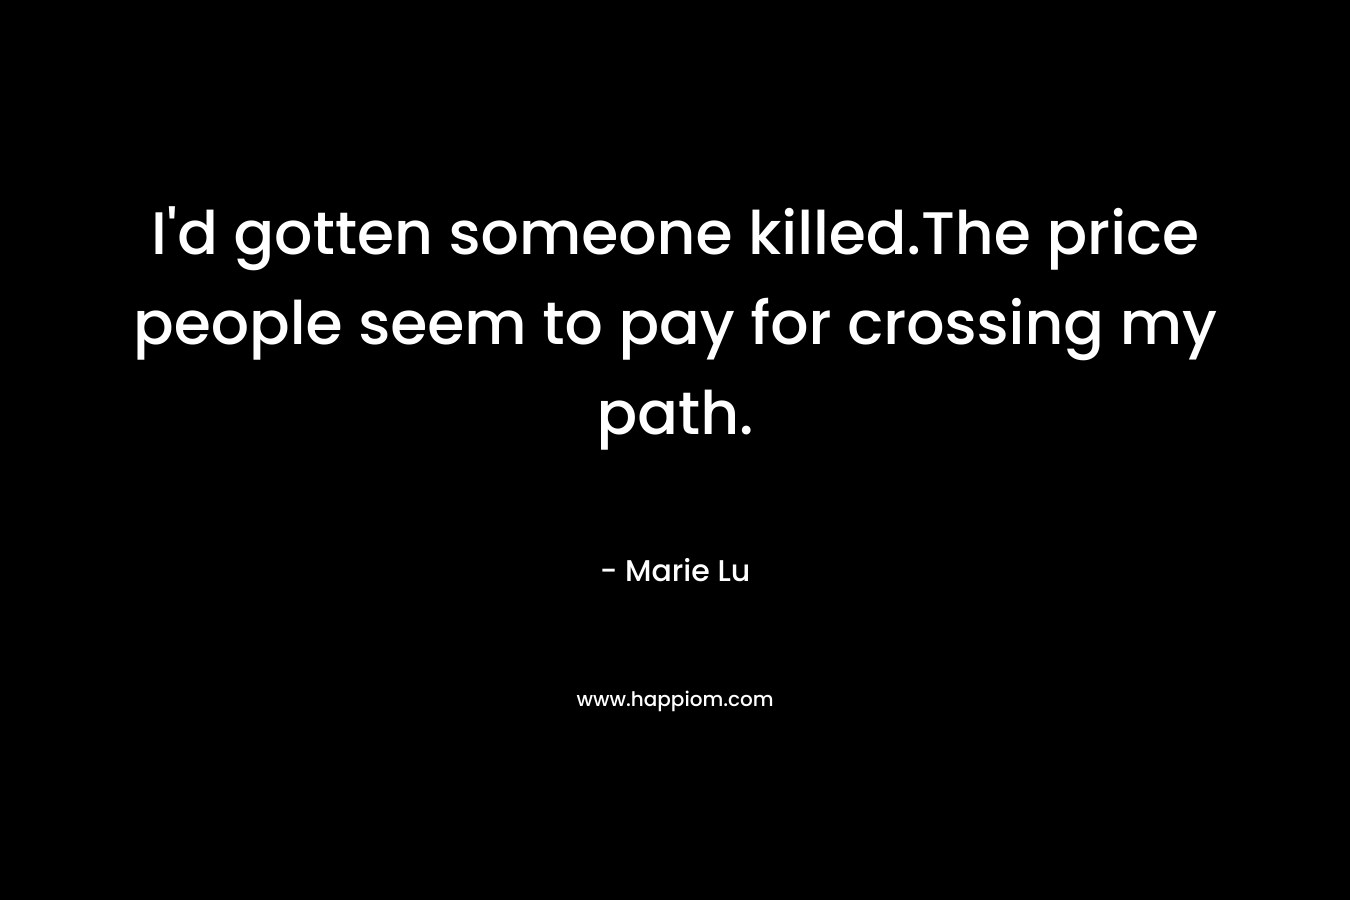 I’d gotten someone killed.The price people seem to pay for crossing my path. – Marie Lu